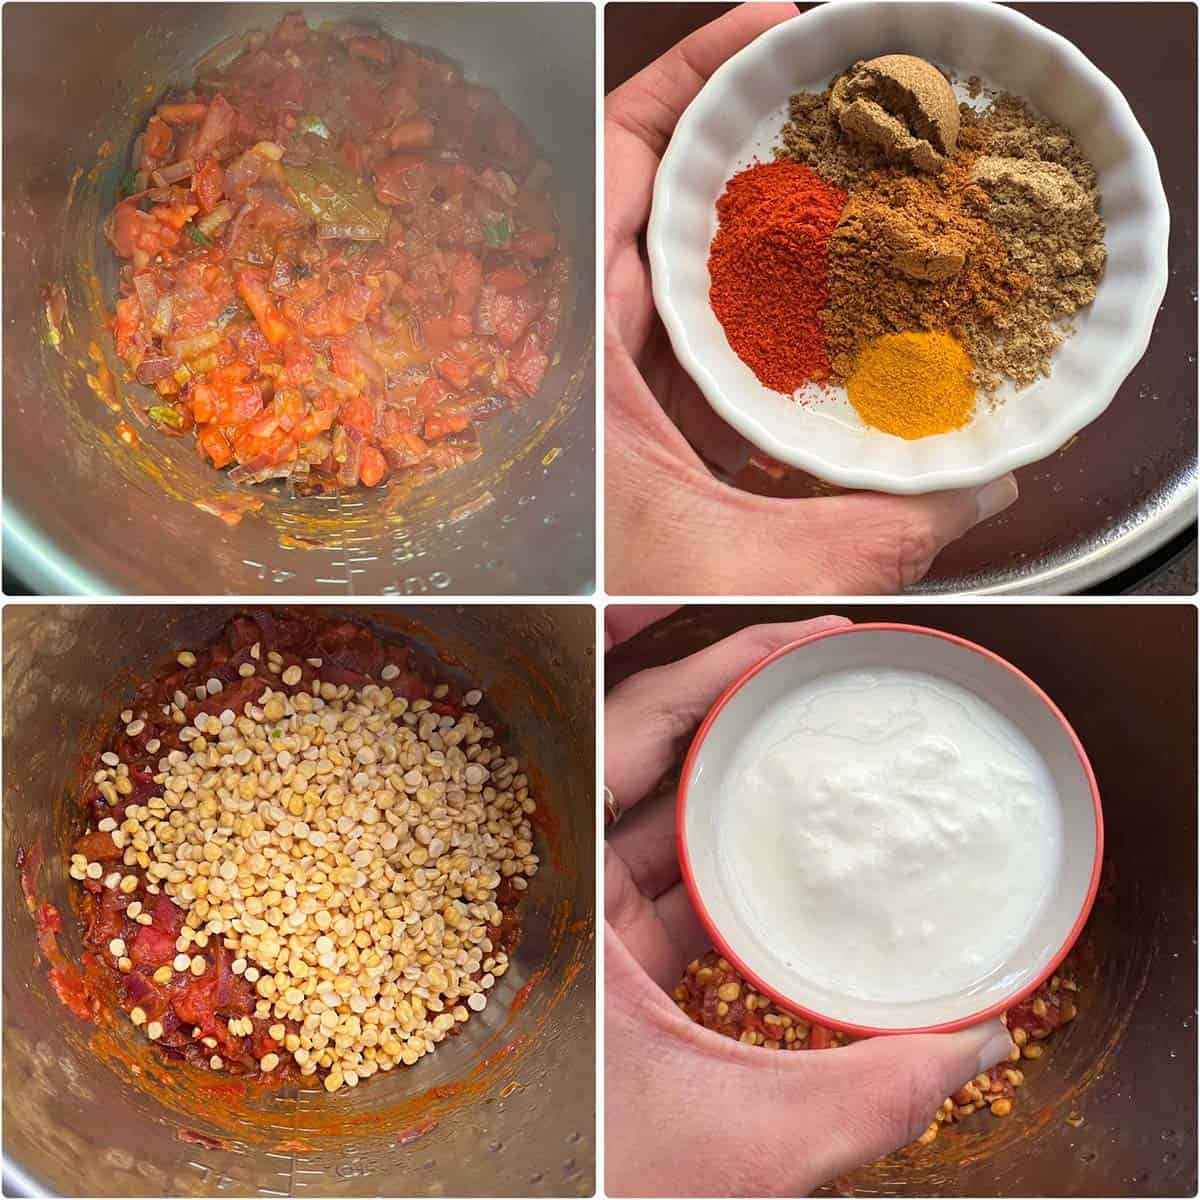 4 panel photo showing the addition of spices to the instant pot.